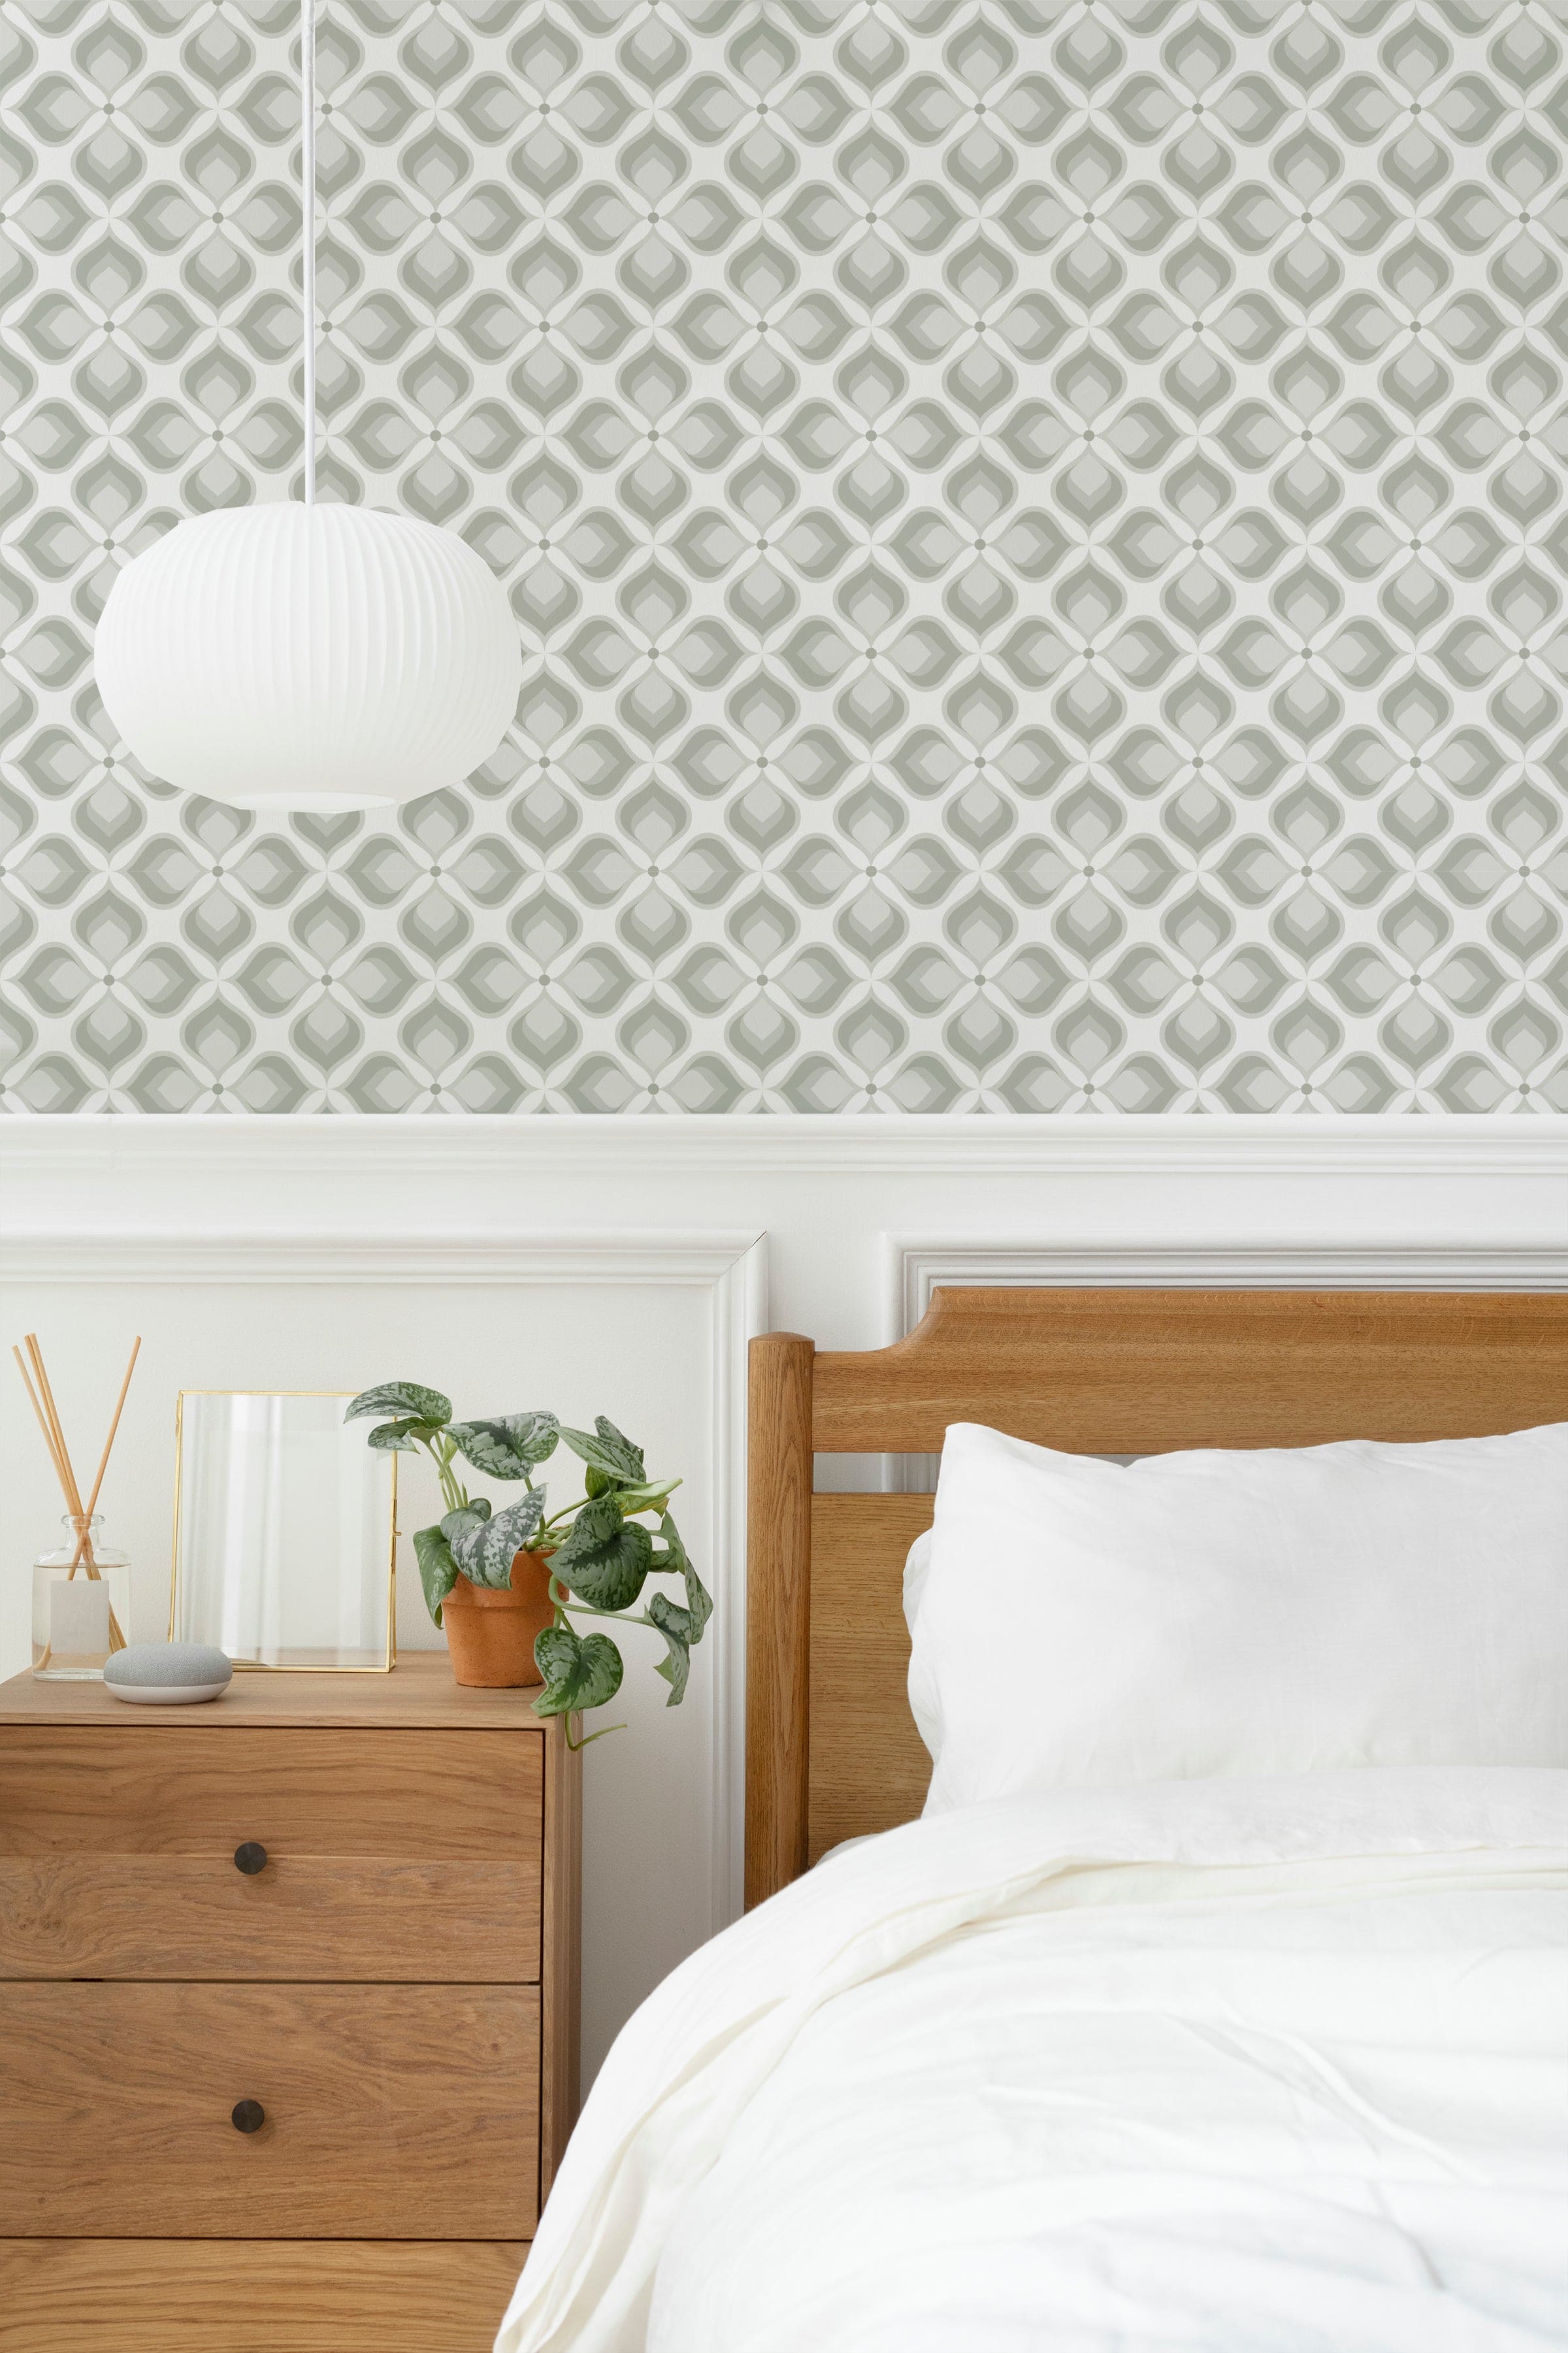 A bedroom setting featuring the Geometric Groove Wallpaper with a subtle, olive-toned geometric pattern. The wallpaper adds a sophisticated touch above the white wainscoting, complemented by a modern wooden bed, a white pendant light, and a dresser adorned with plants and decor items